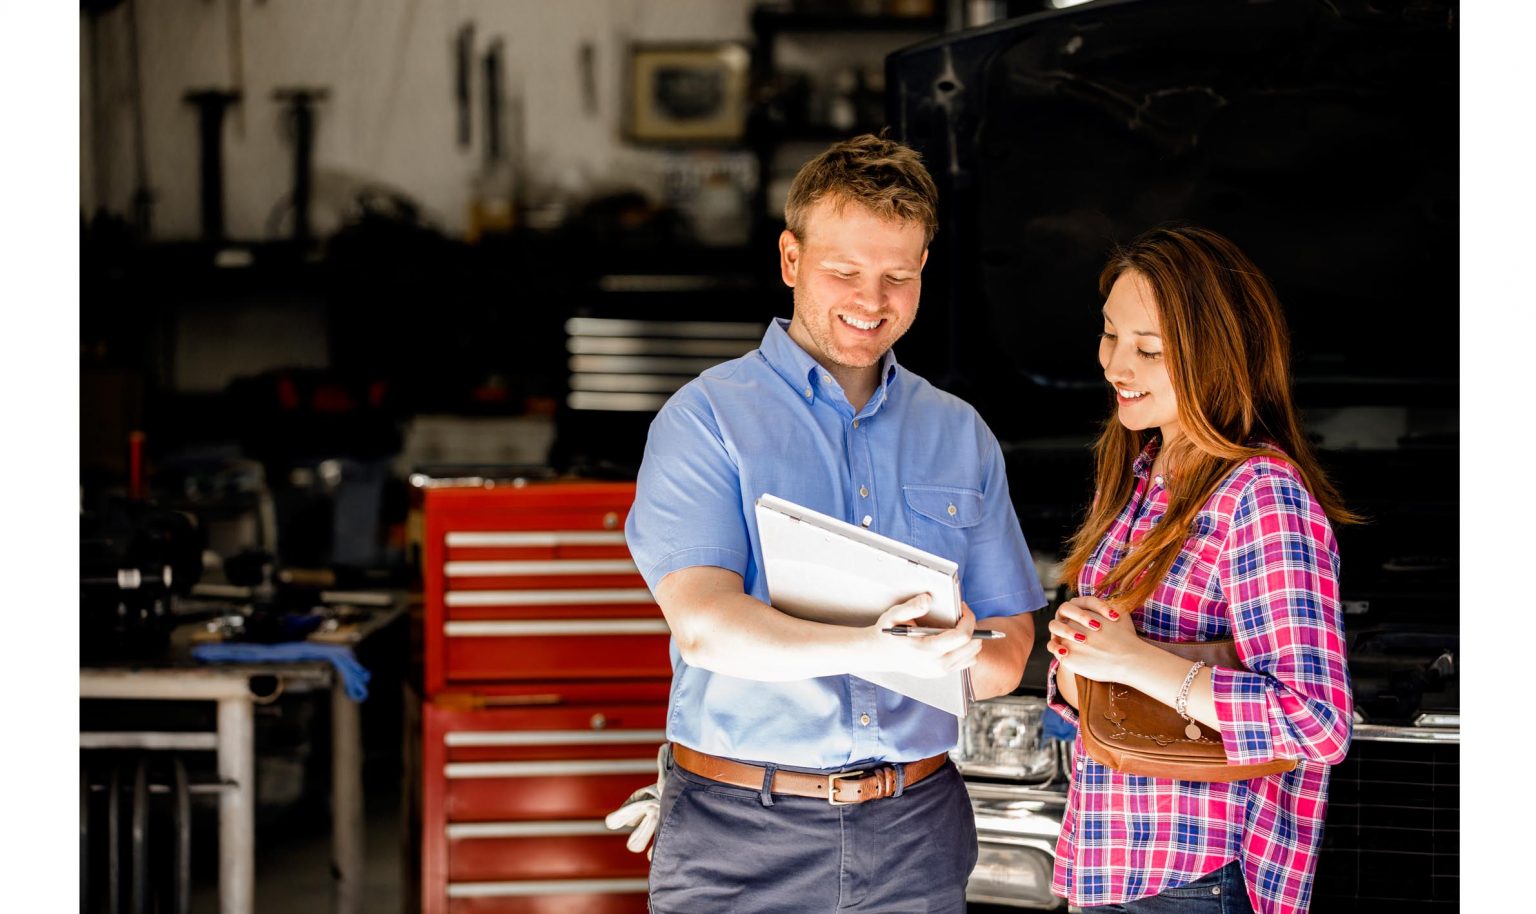 Independent Mechanics Outrank Dealers on Relationship, Trust and ... - Mechanic 1536x914